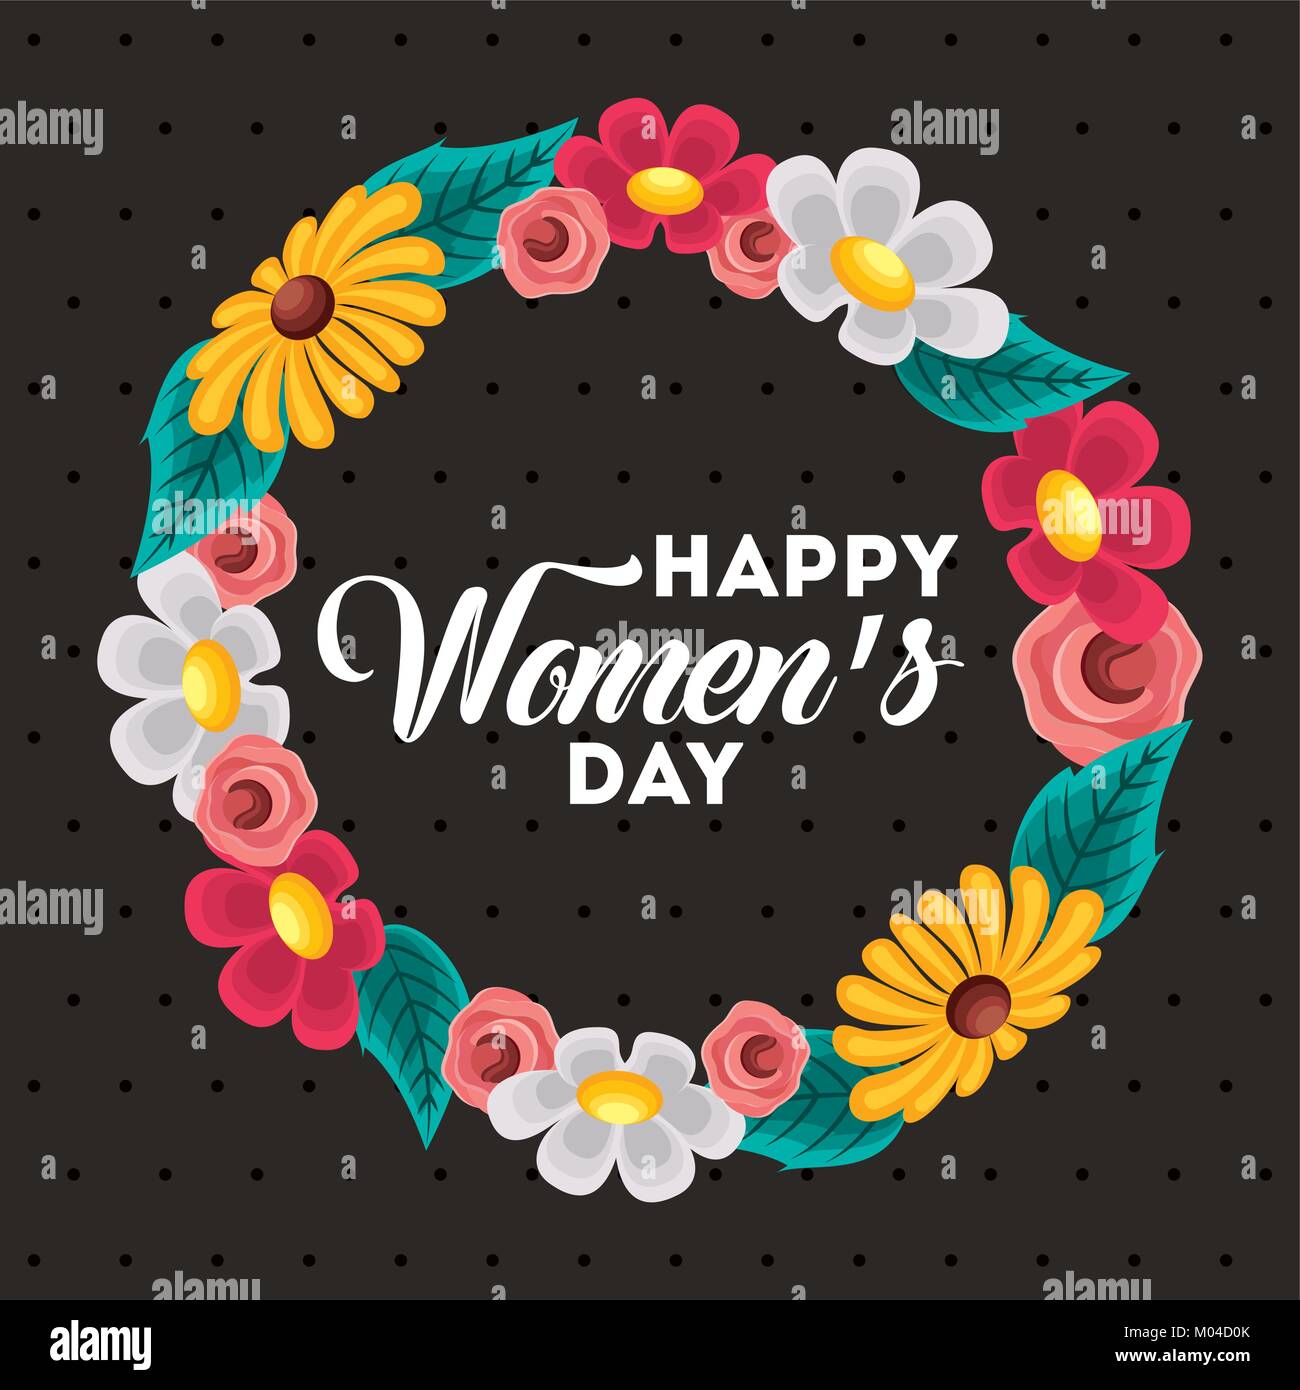 poster international happy womens day 8 march floral greeting card ...